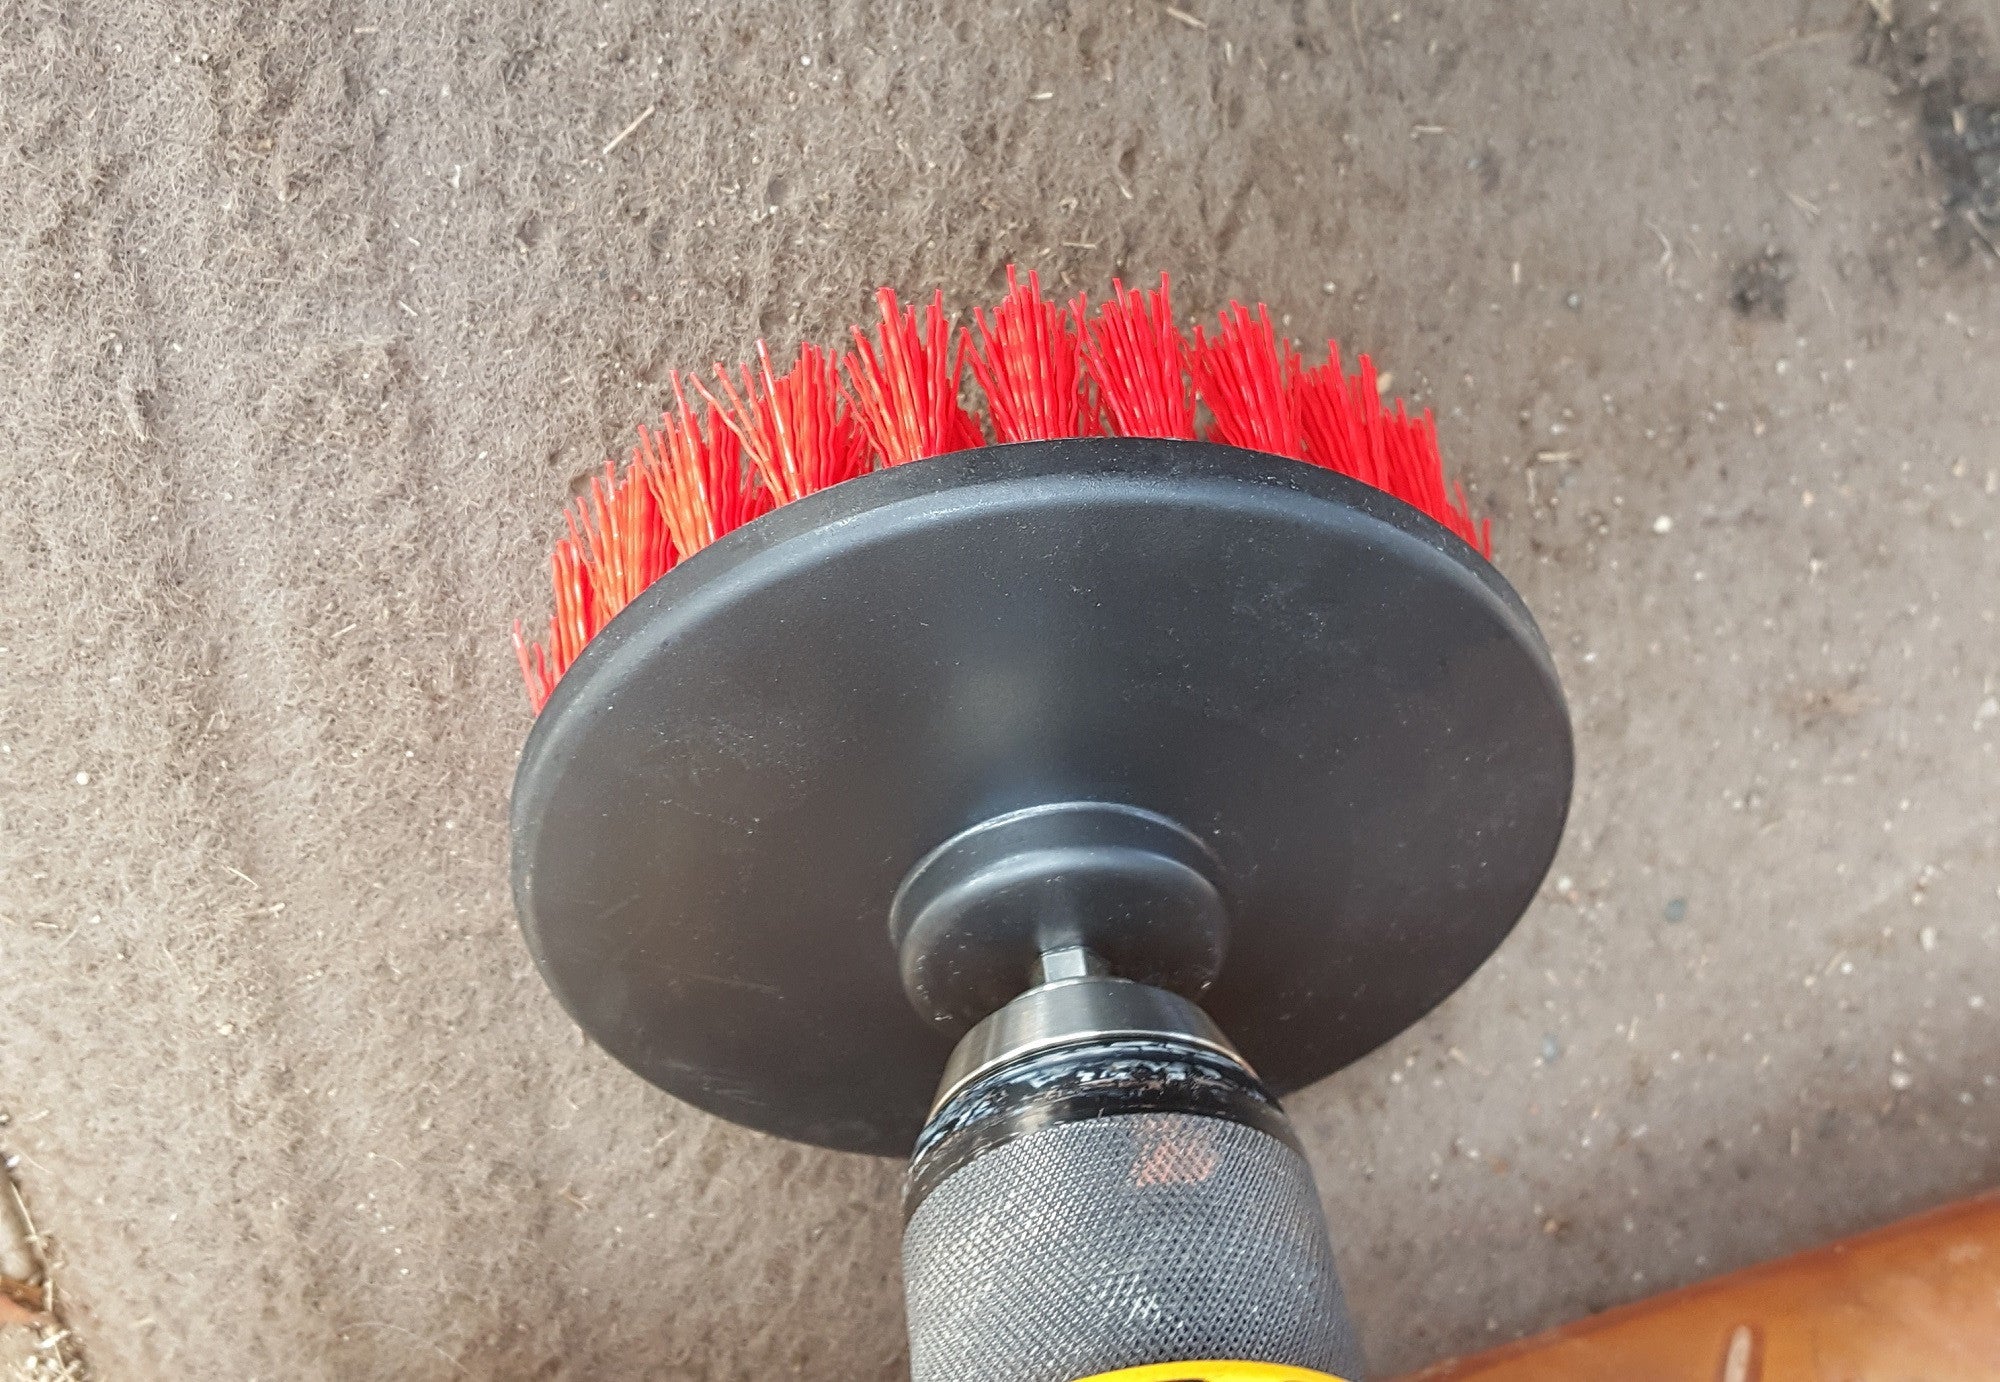 Upholstery Cleaning Drill Brushes